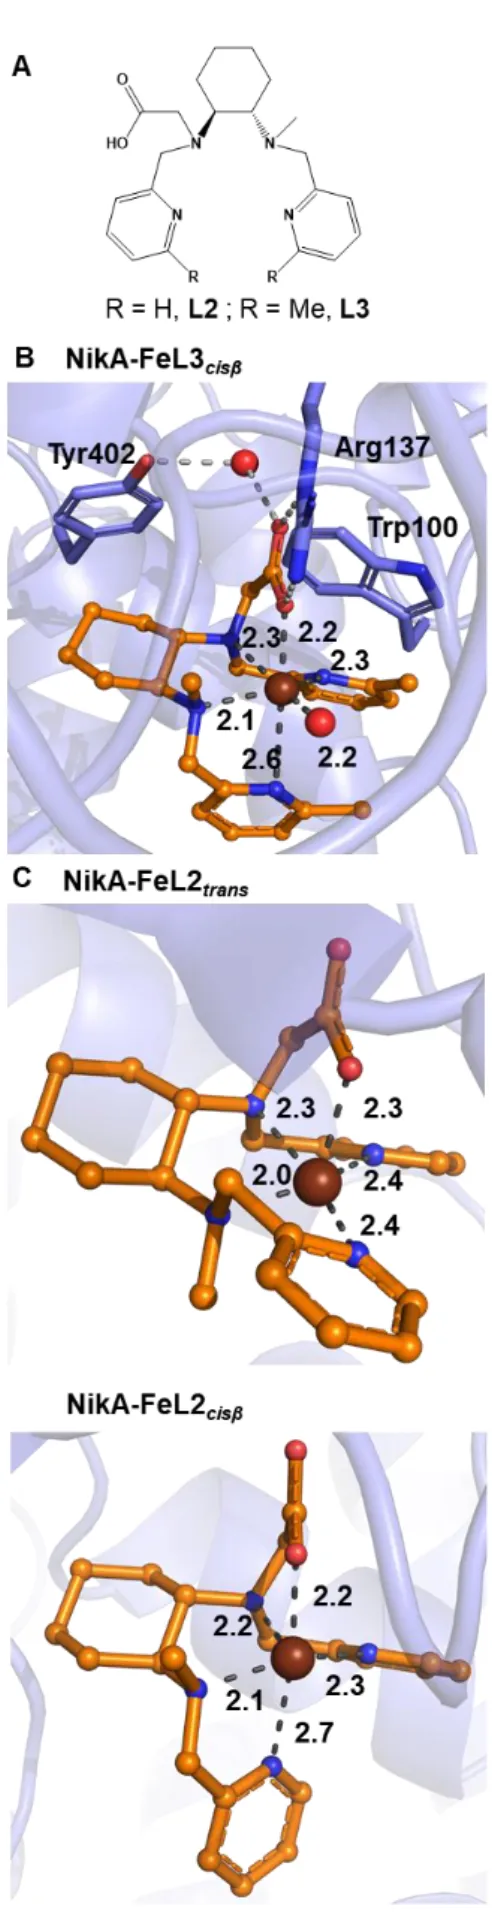 Figure 1. A: Structures of ligands L2 and L3. B: Crystal structure of NikA-FeL3 binding site